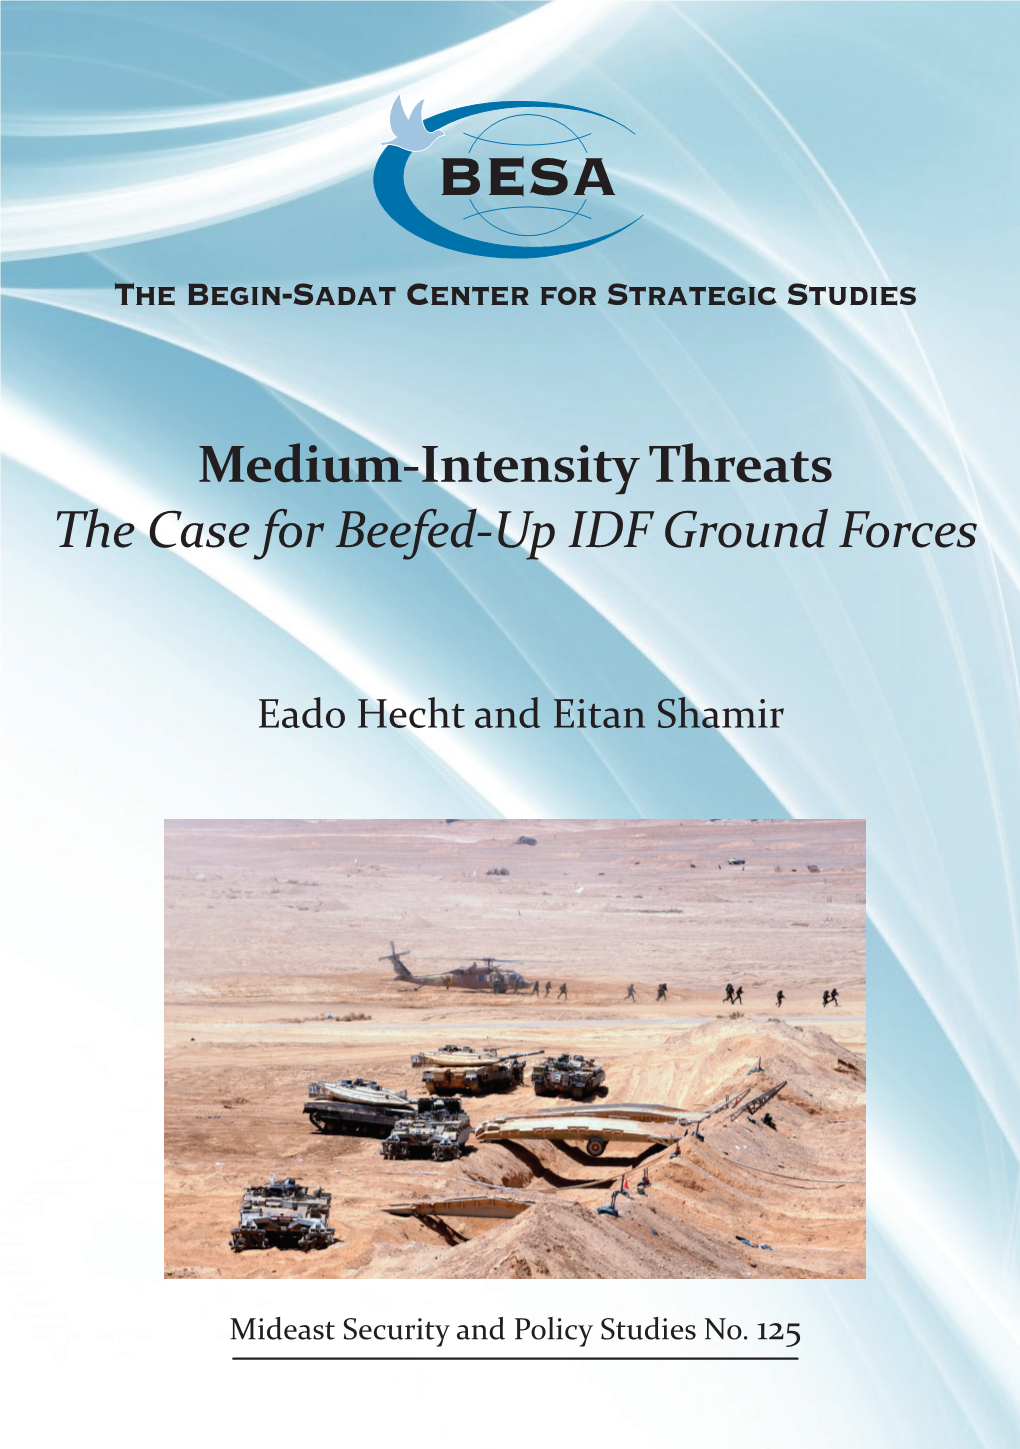 Medium-Intensity Threats the Case for Beefed-Up IDF Ground Forces